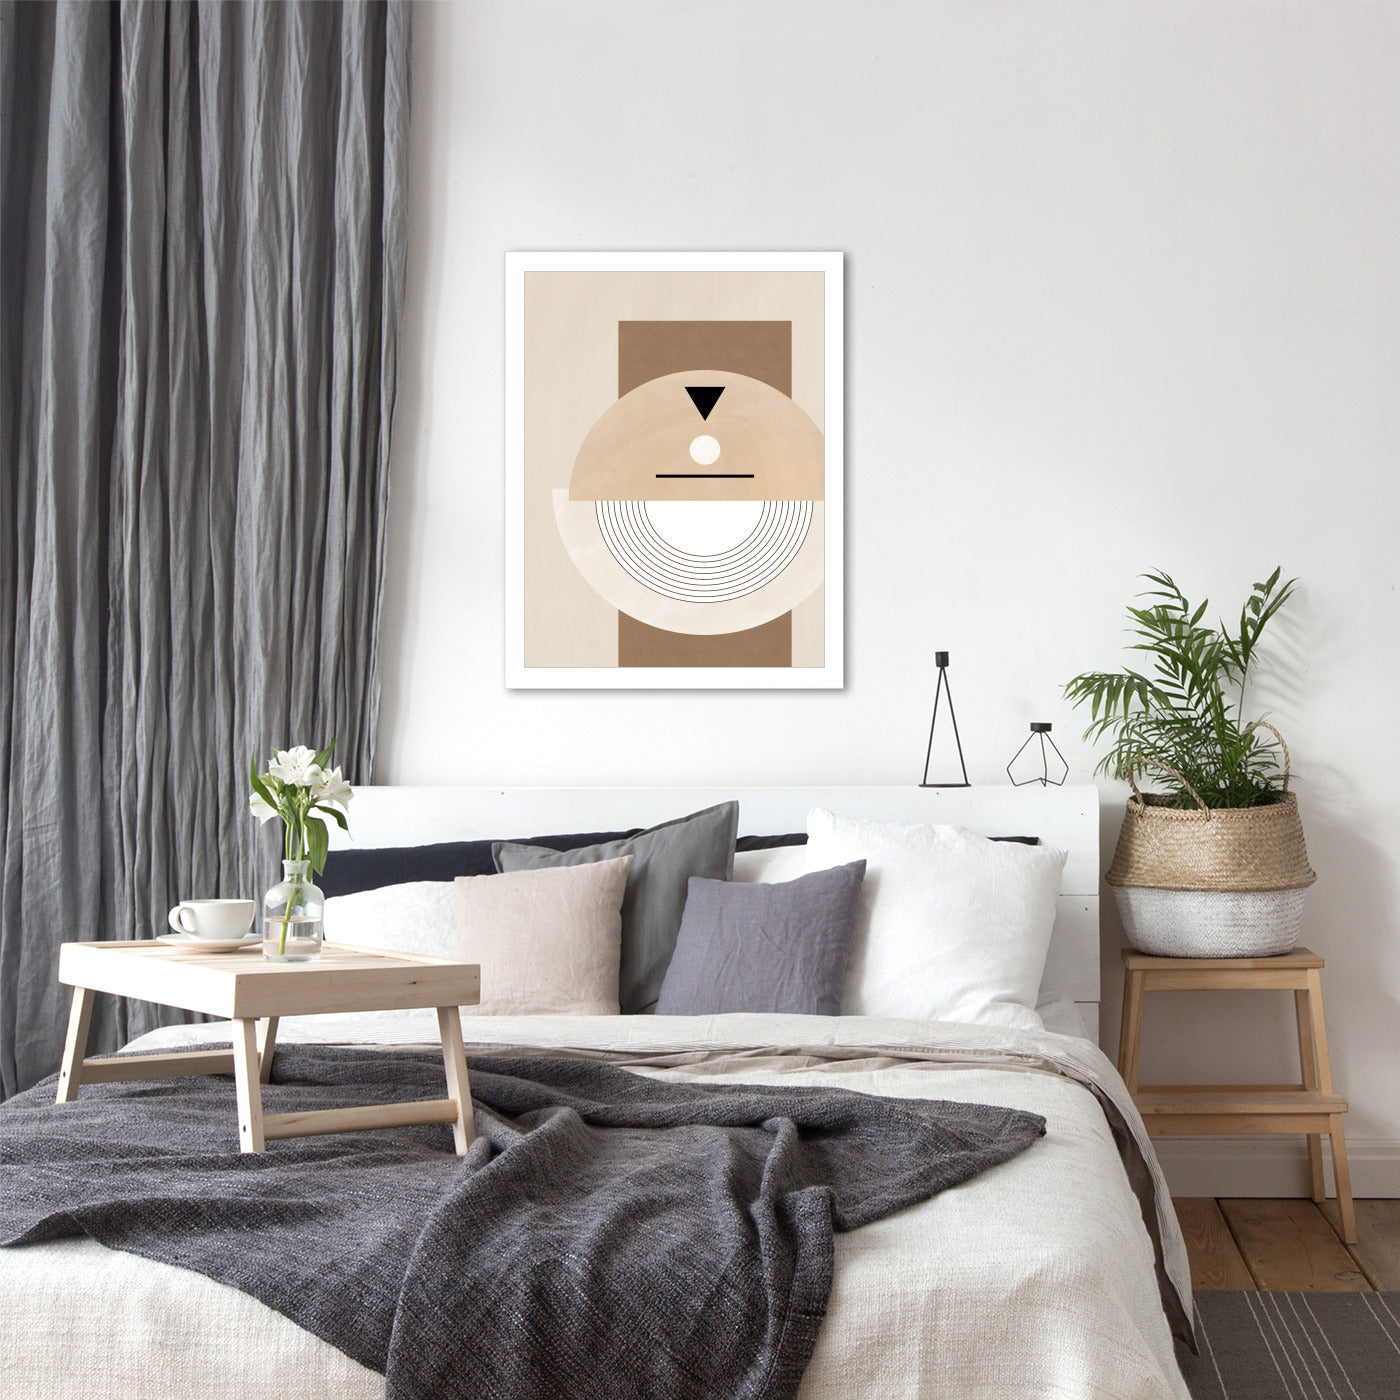 Bauhaus Neutral Abstract Tones 2 by The Print Republic - Canvas, Poster or Framed Print